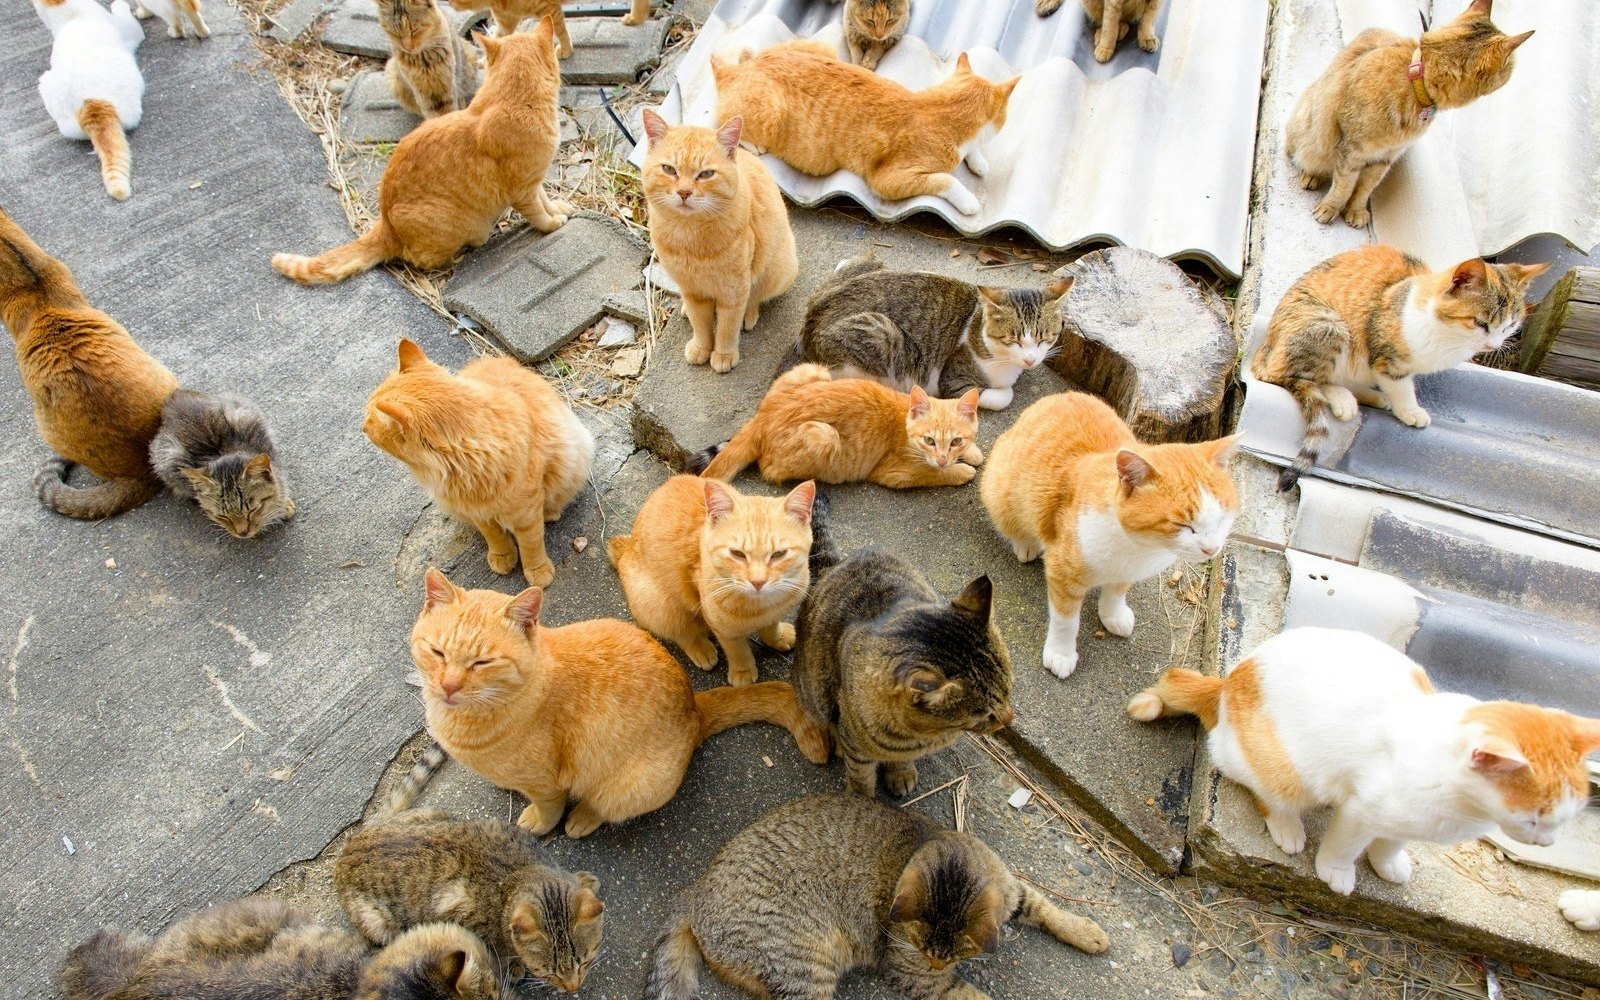 Aoshima: A Guide To Visiting the Best Cat Island in Japan